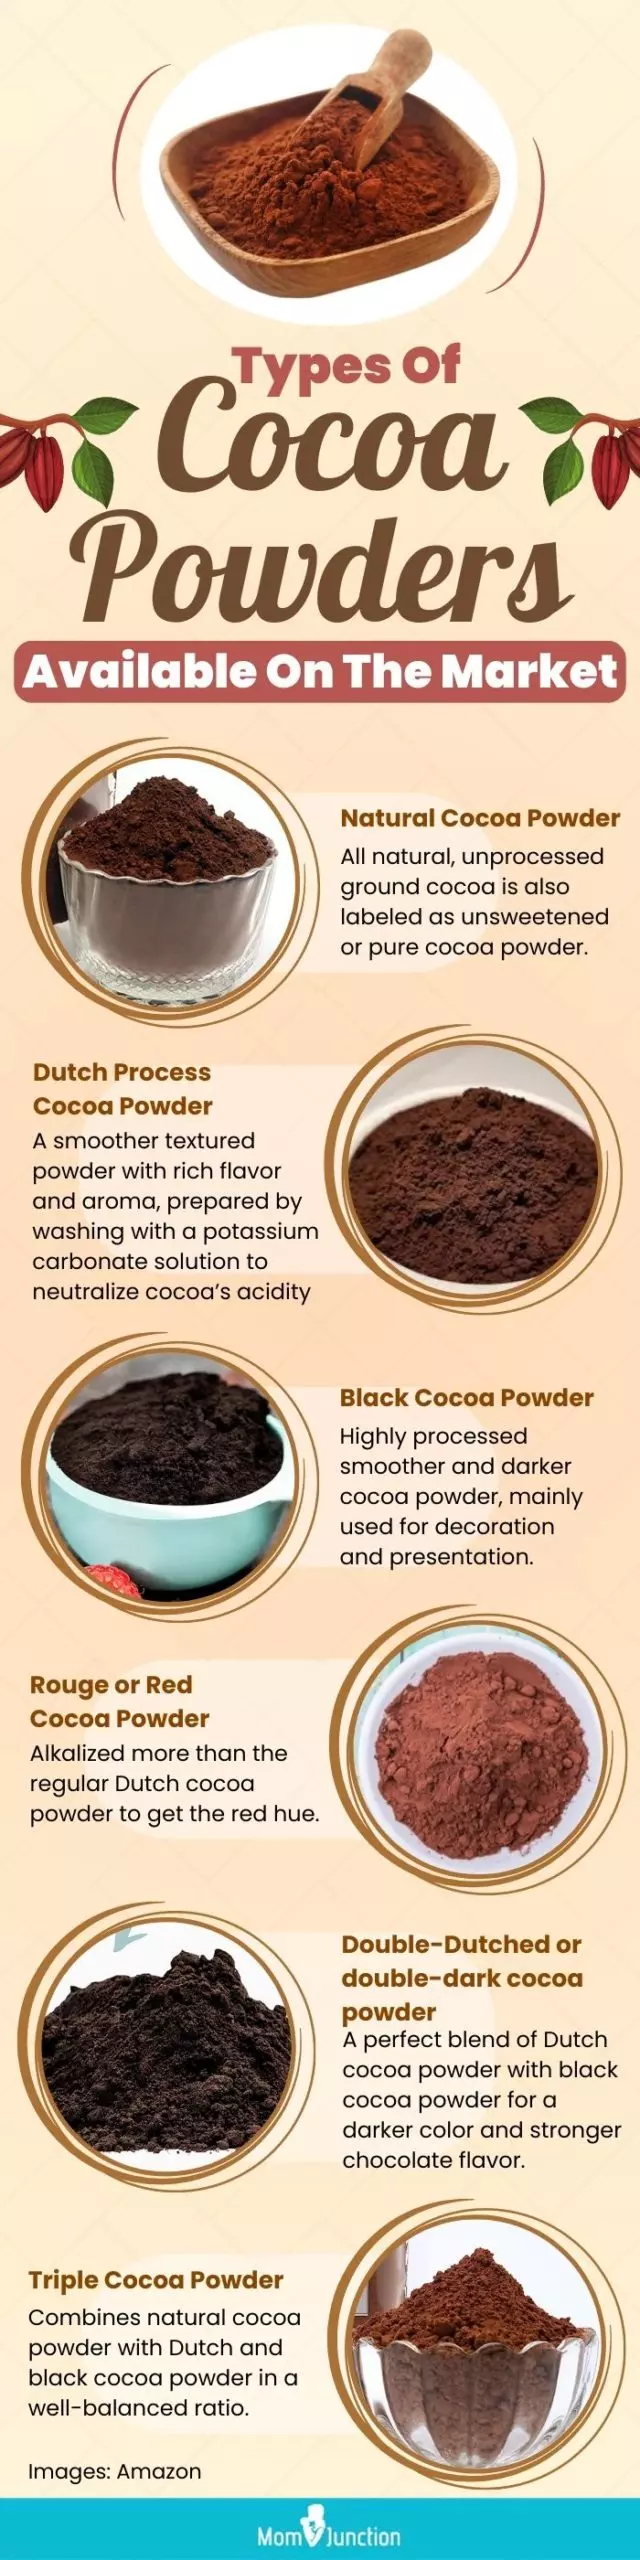 Types Of Cocoa Powders Available On The Market (infographic)